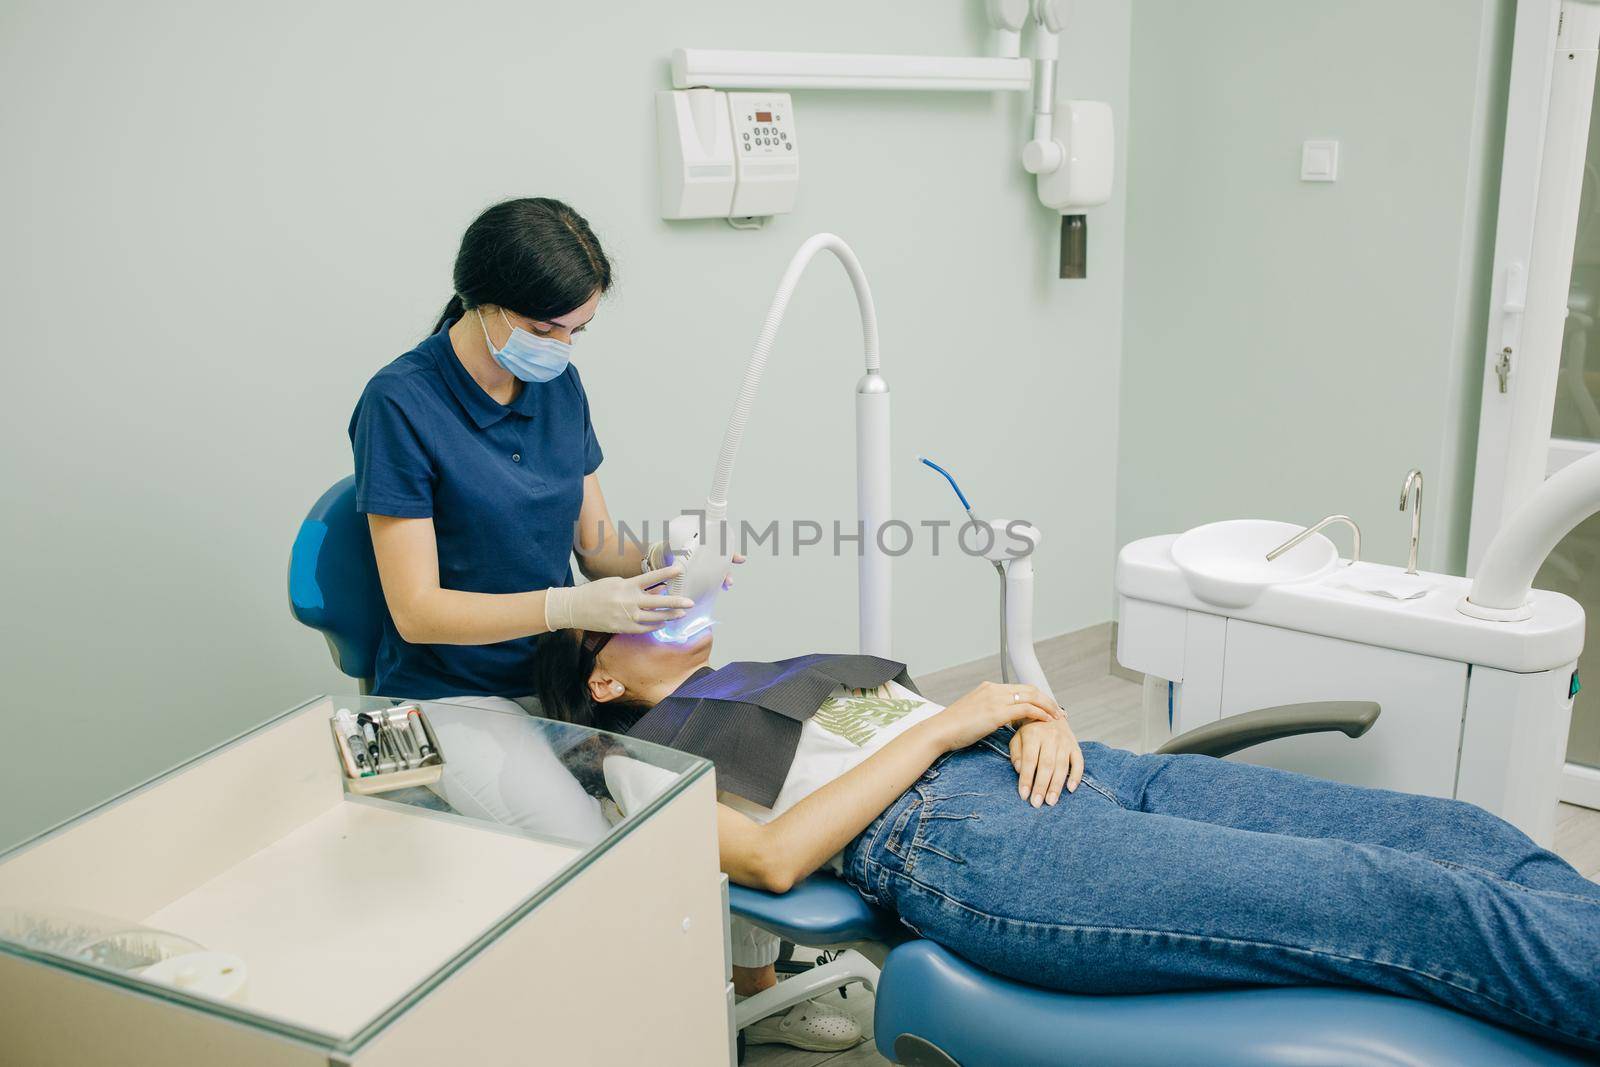 Dentist stomatologist whitening teeth for patient in medicine dental clinic with lamp. Concept of teeth care and dentistry. Teeth whitening procedure by uflypro